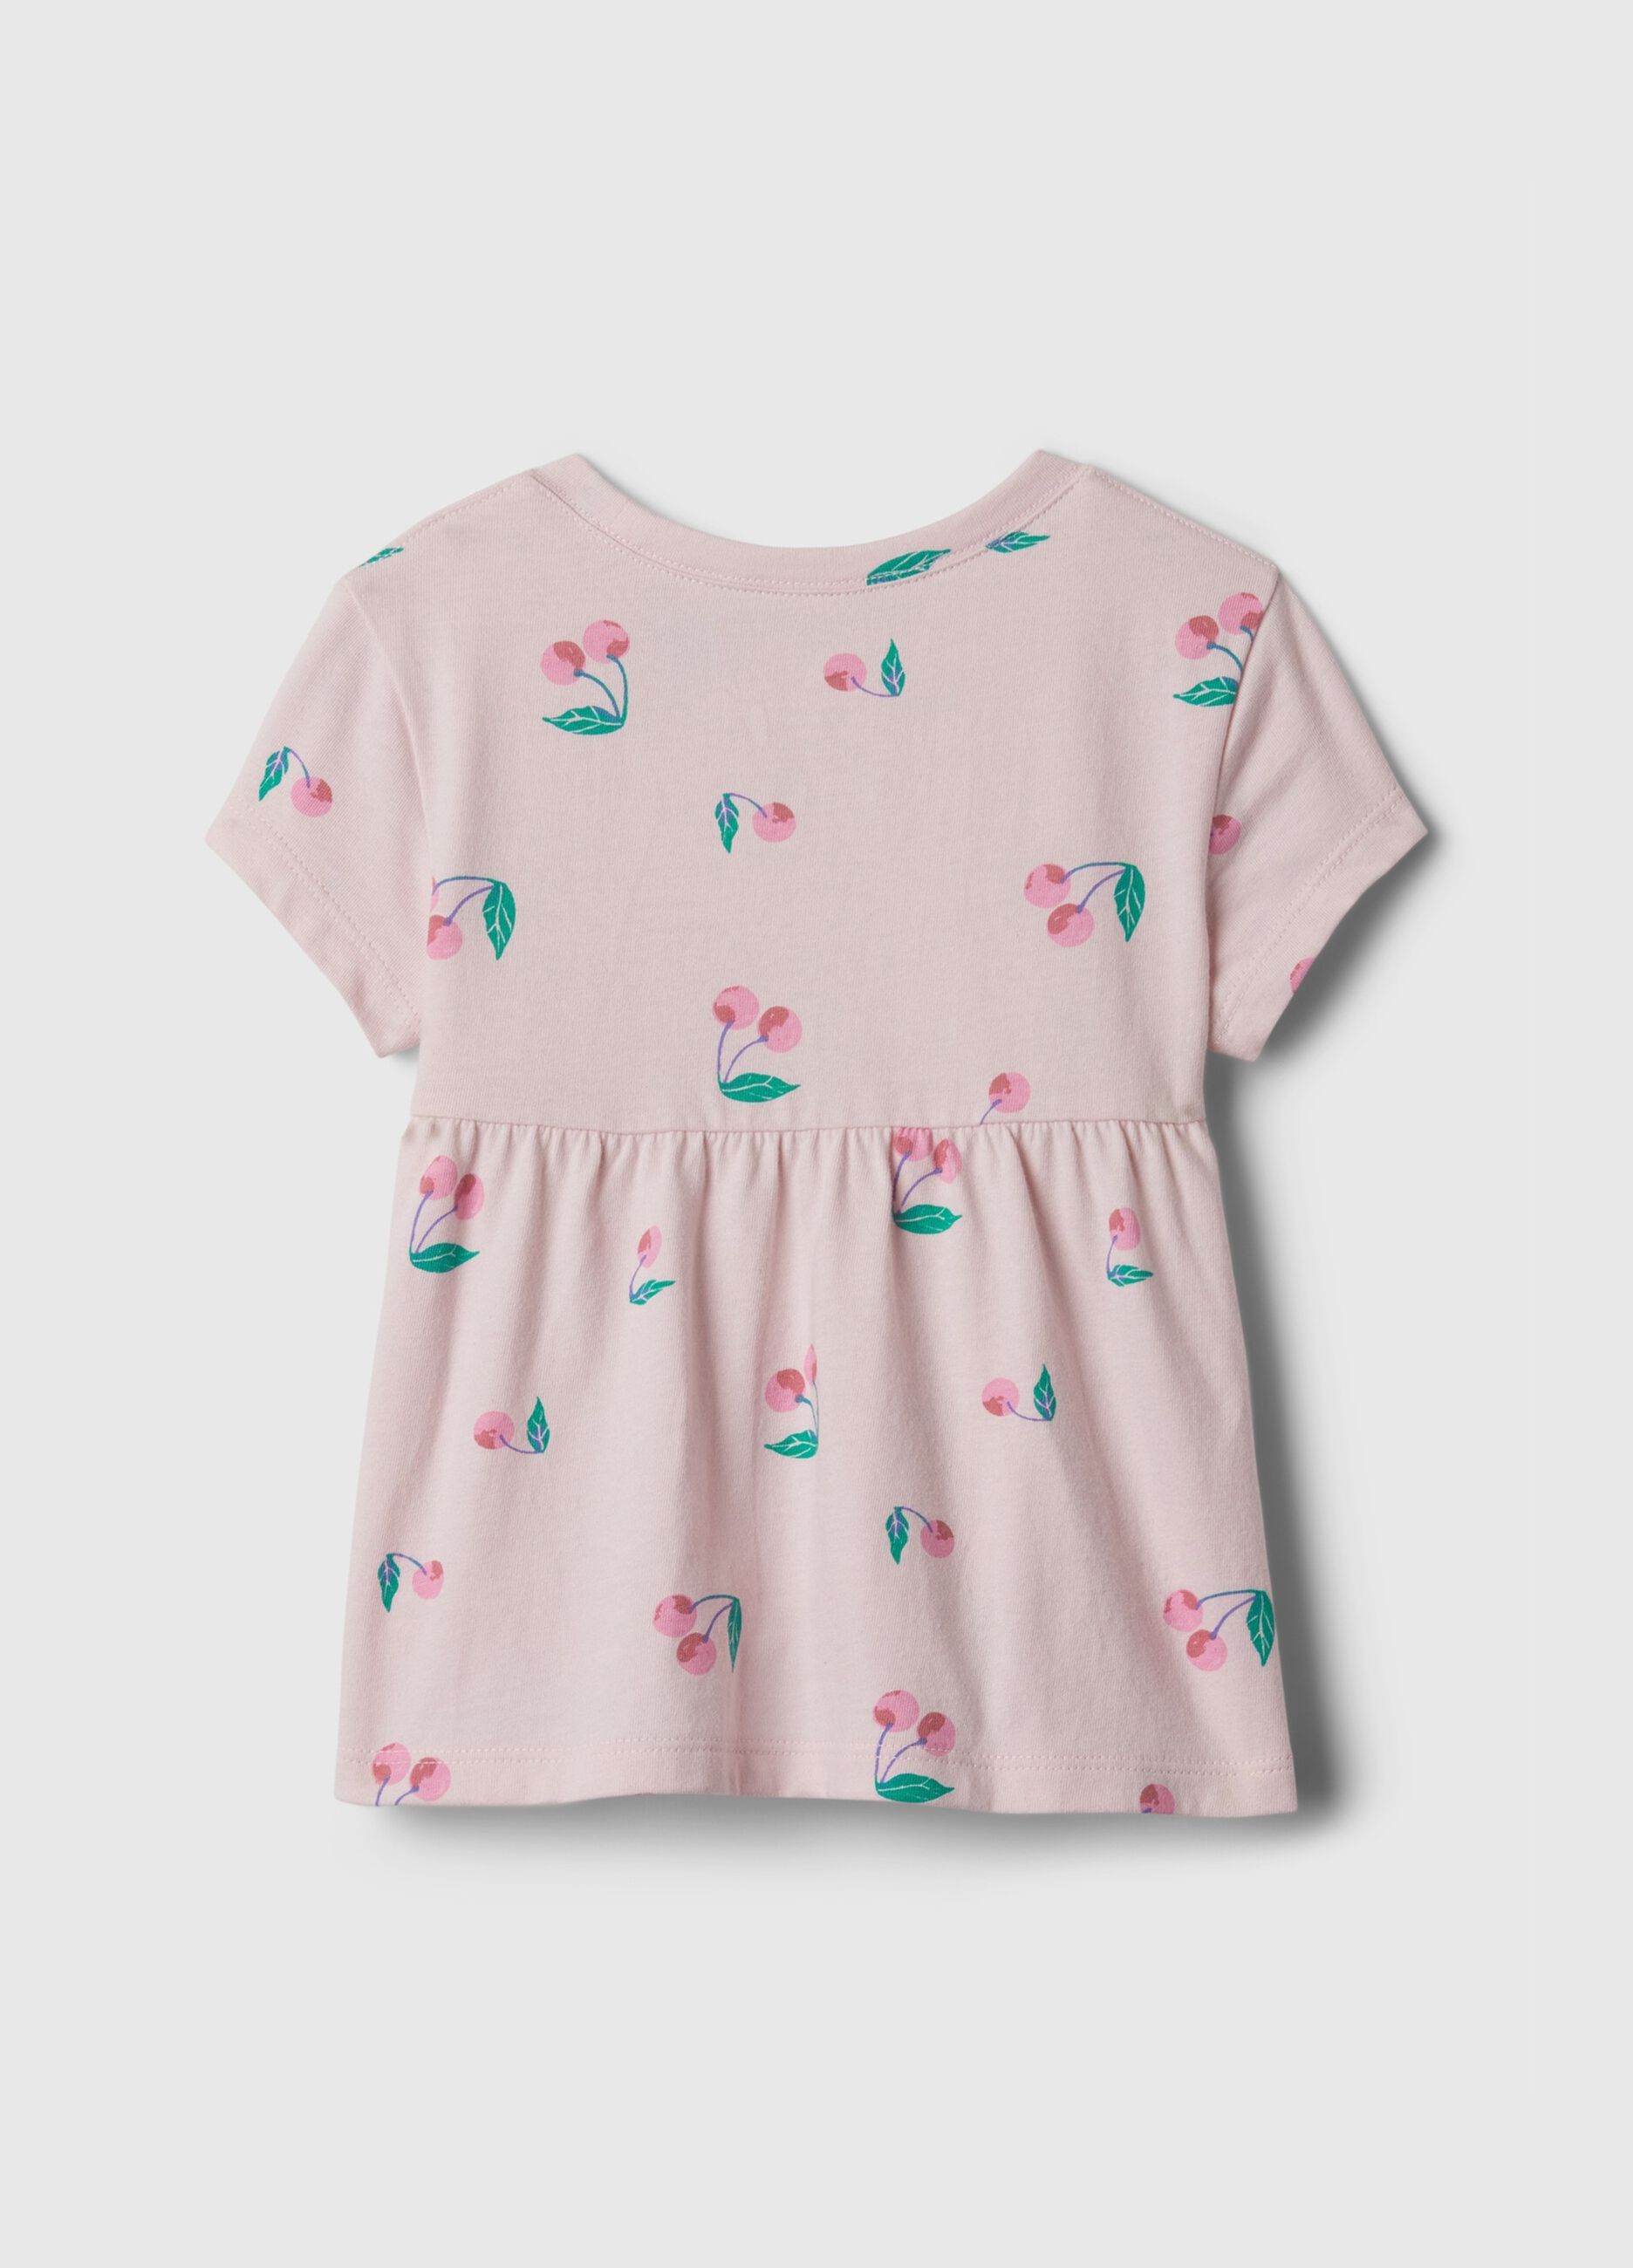 Cotton T-shirt with cherries print